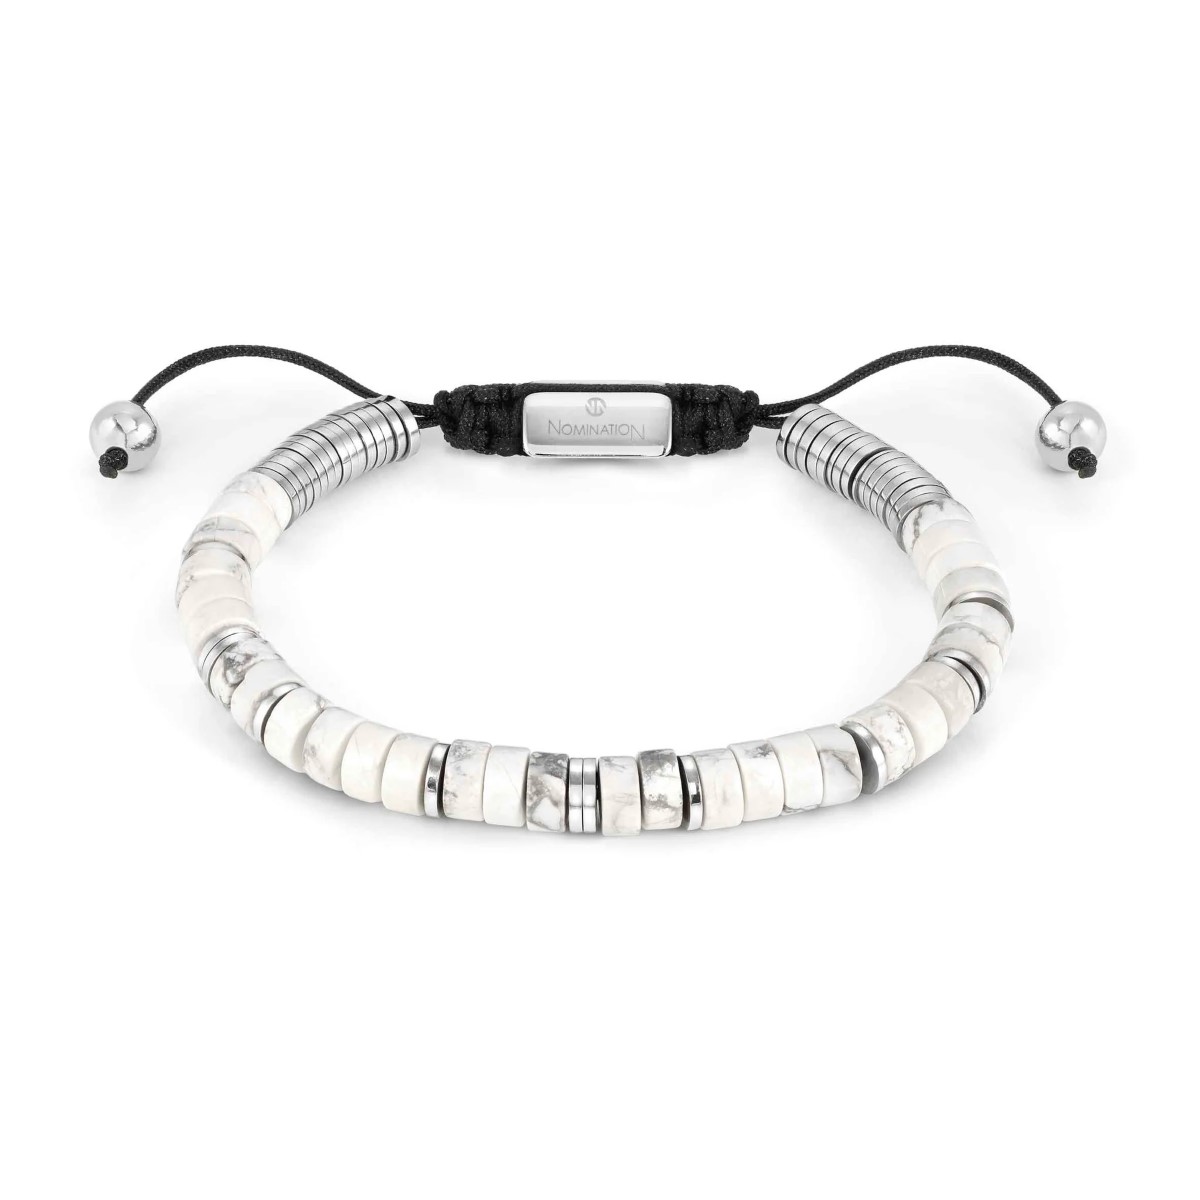 Nomination Instinct Style Bracelet in Steel with Stones - White Turquoise 027925_085